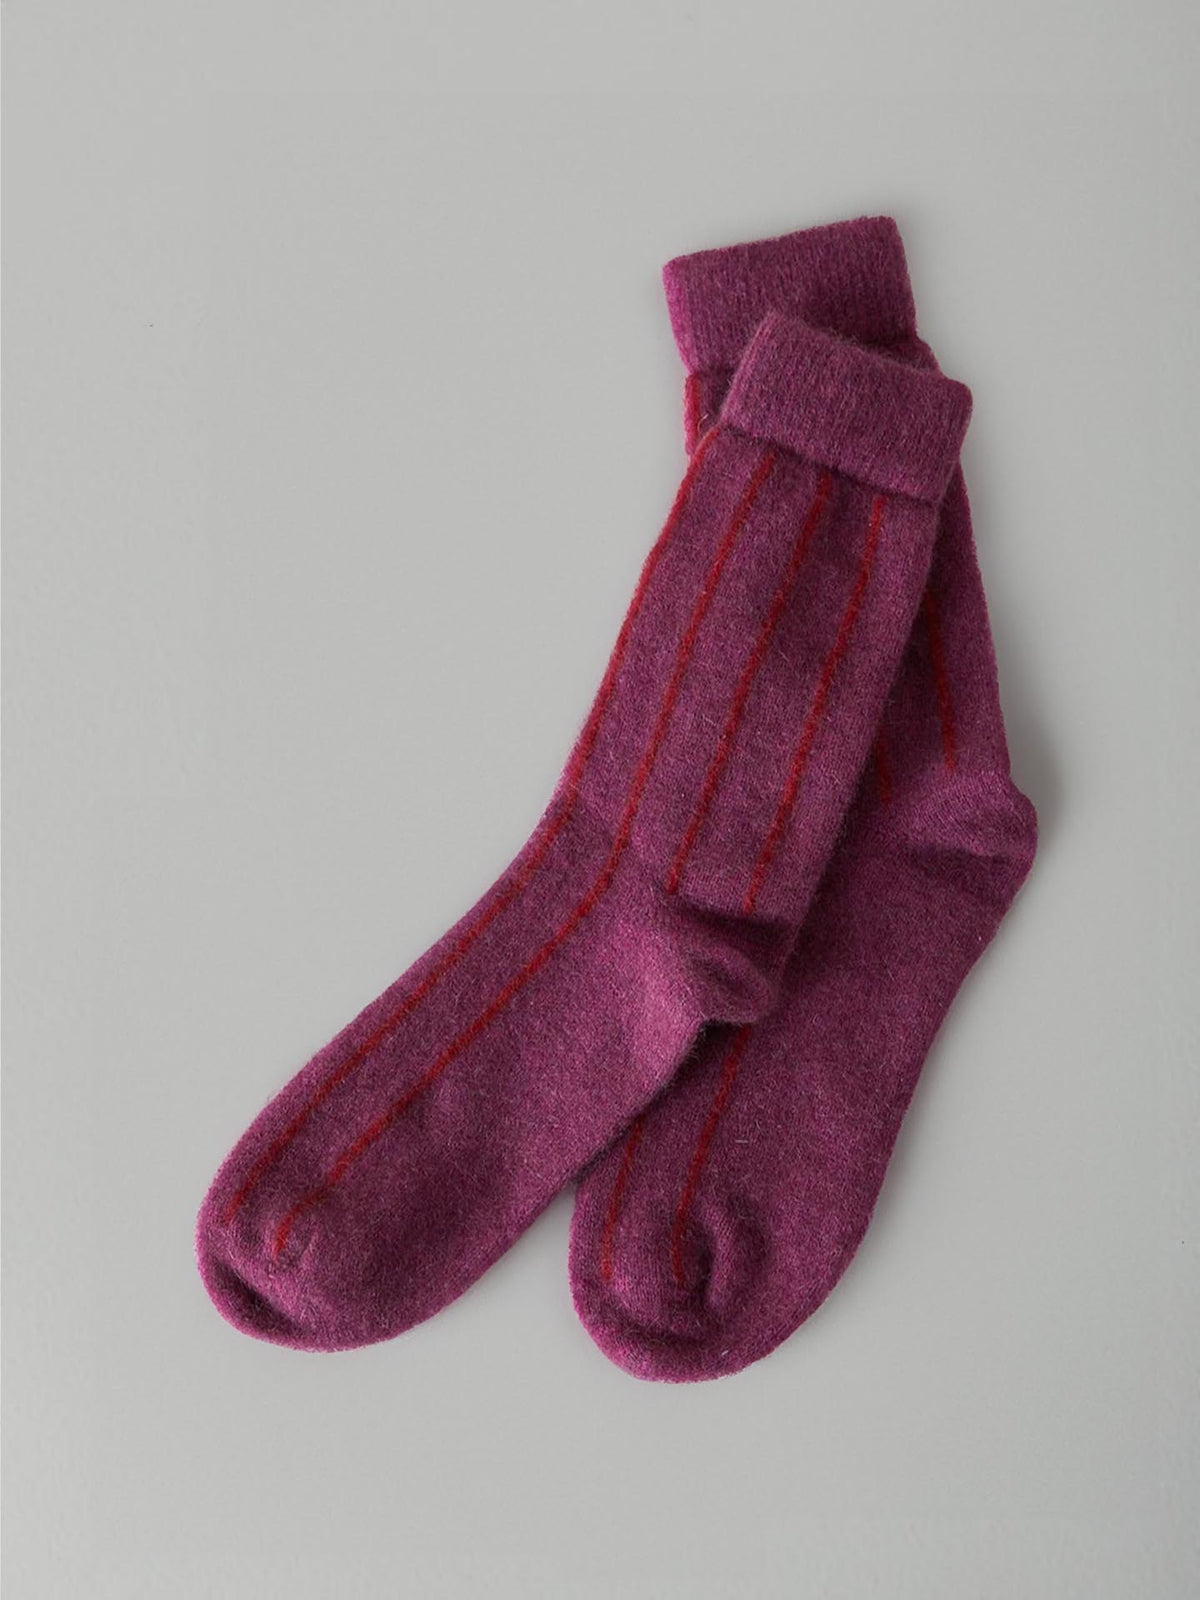 A pair of folded Possum Merino Socks – Orchid &amp; Poppy Stripe by Francie displayed against a light gray background.